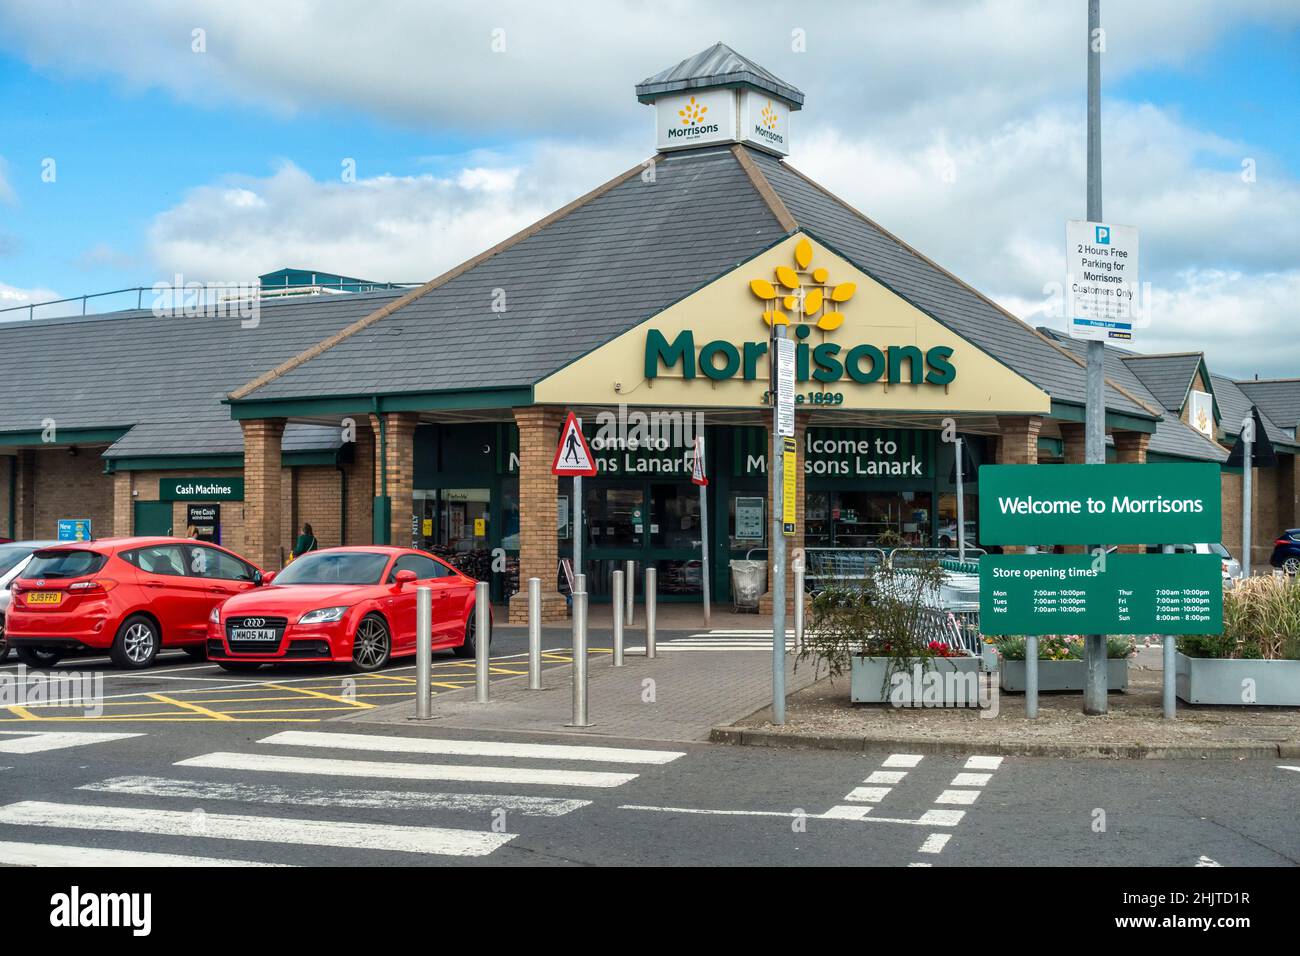 Exterior of and entrance to the Morrisons supermarket in Lanark, Scotland, UK Stock Photo